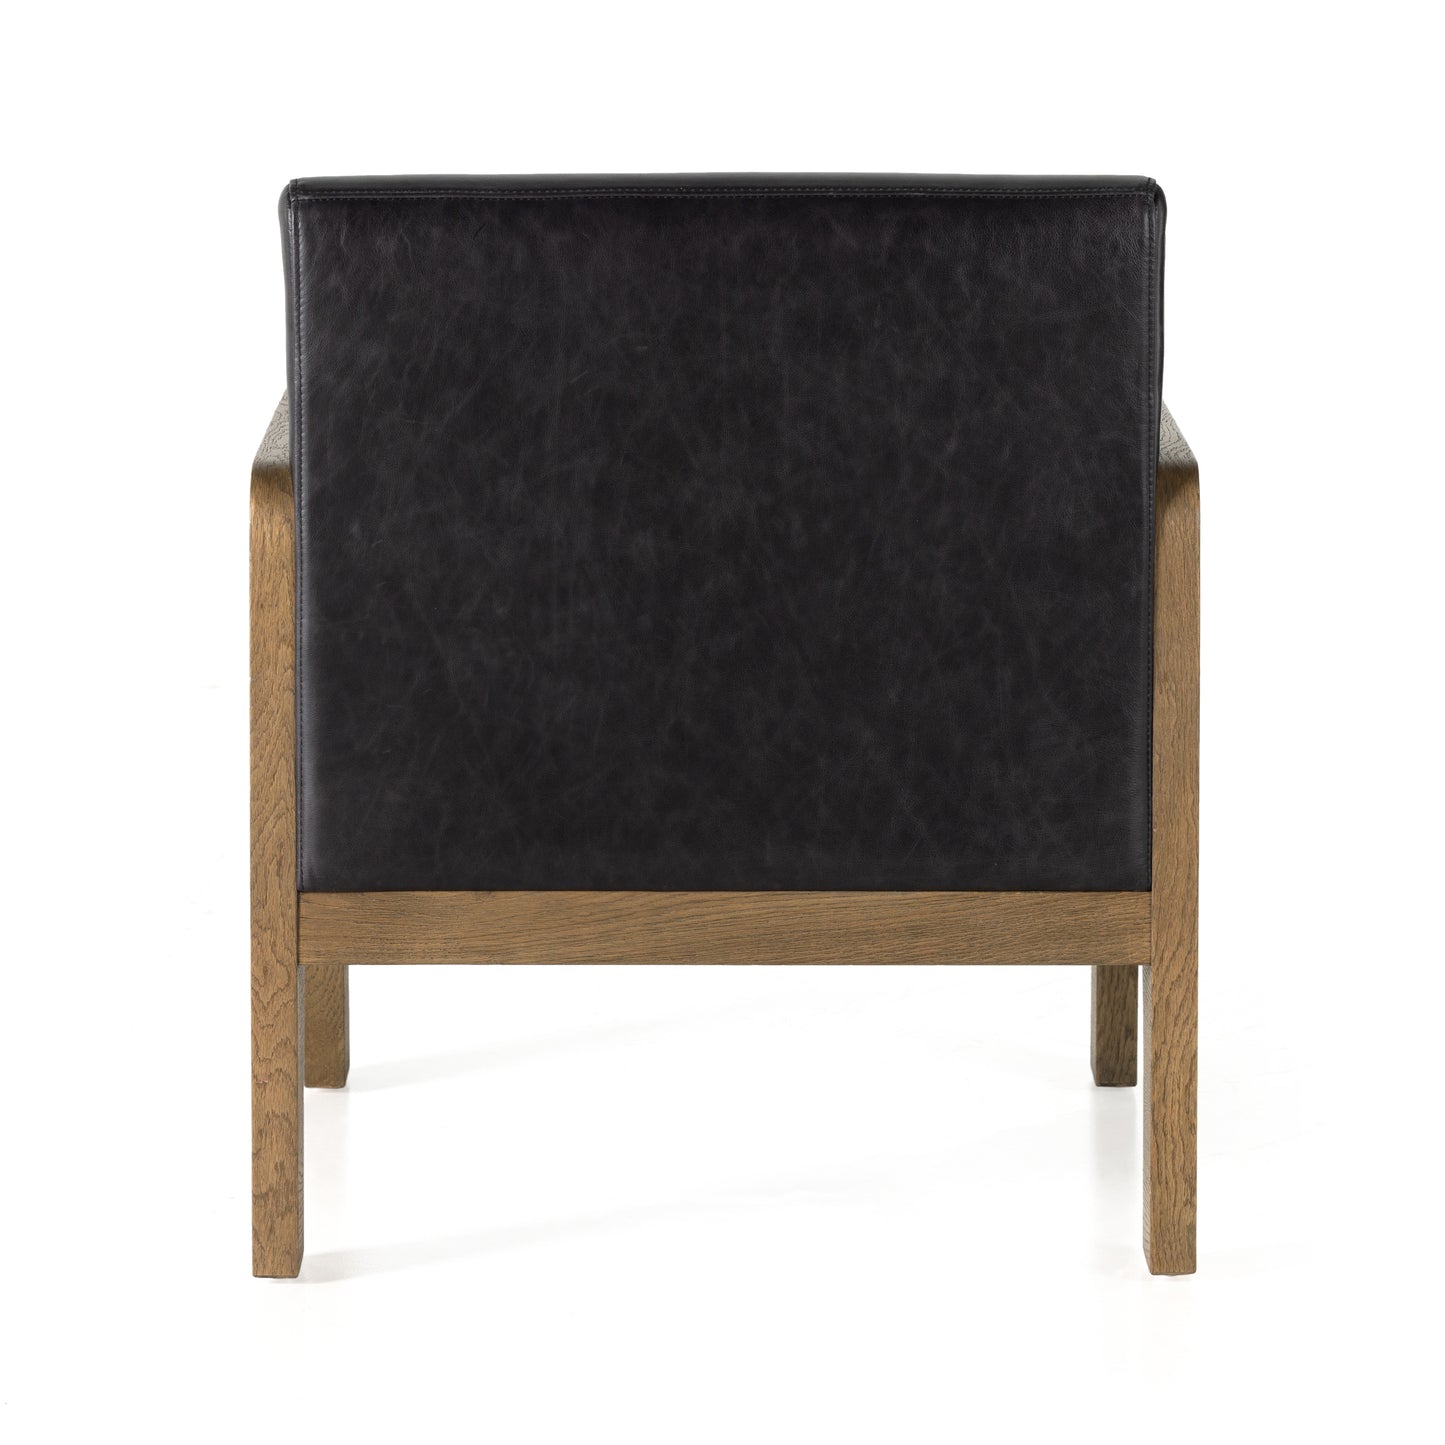 Load image into Gallery viewer, Jeanne Chair-Sonoma Black Lounge Chair Four Hands     Four Hands, Mid Century Modern Furniture, Old Bones Furniture Company, Old Bones Co, Modern Mid Century, Designer Furniture, https://www.oldbonesco.com/
